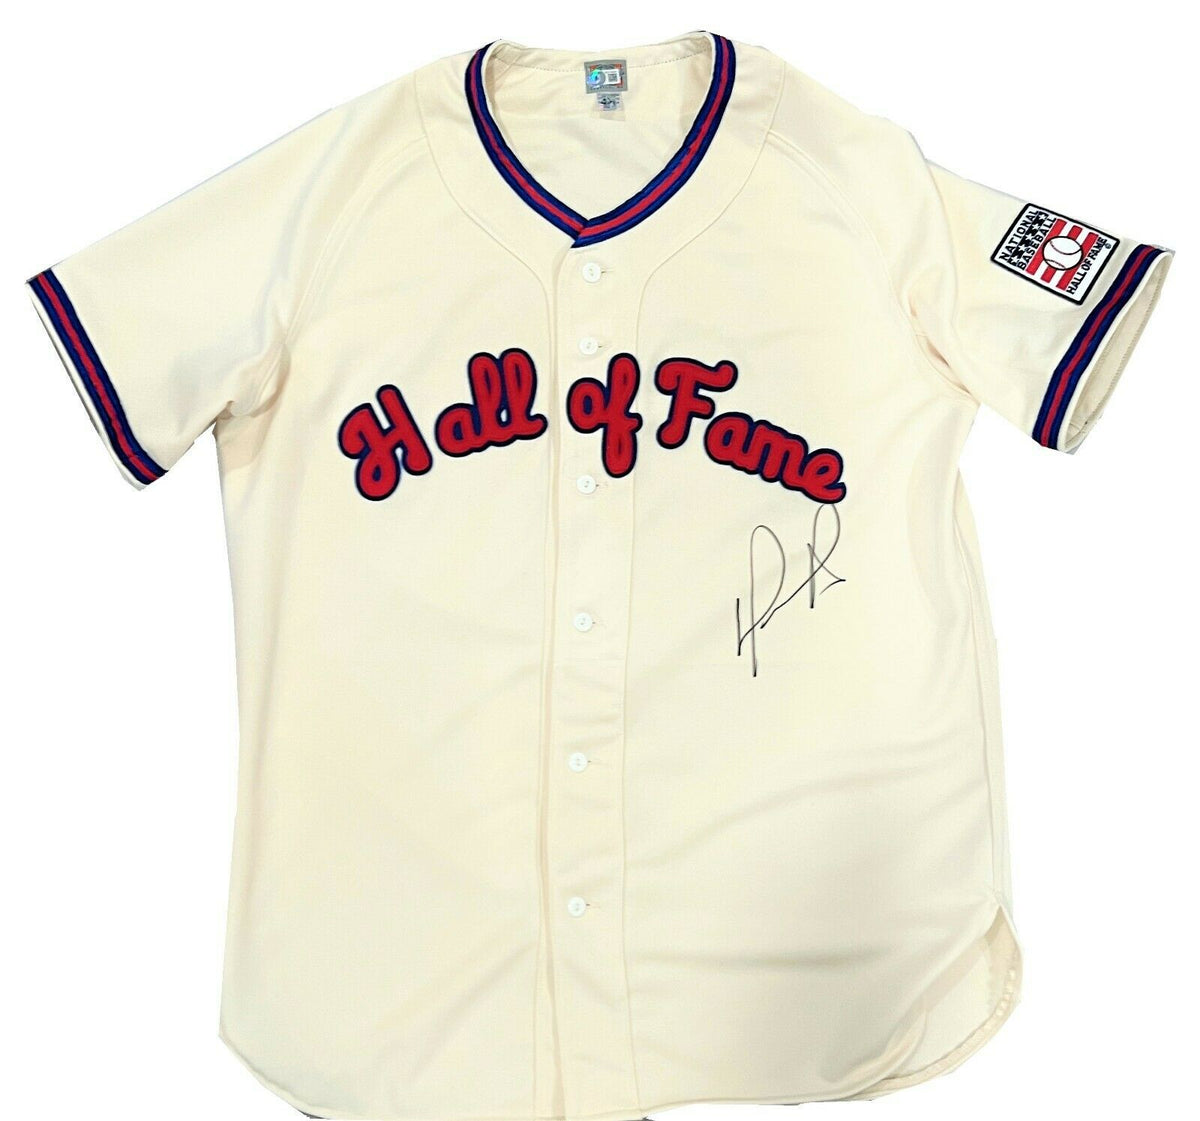 ortiz hall of fame jersey